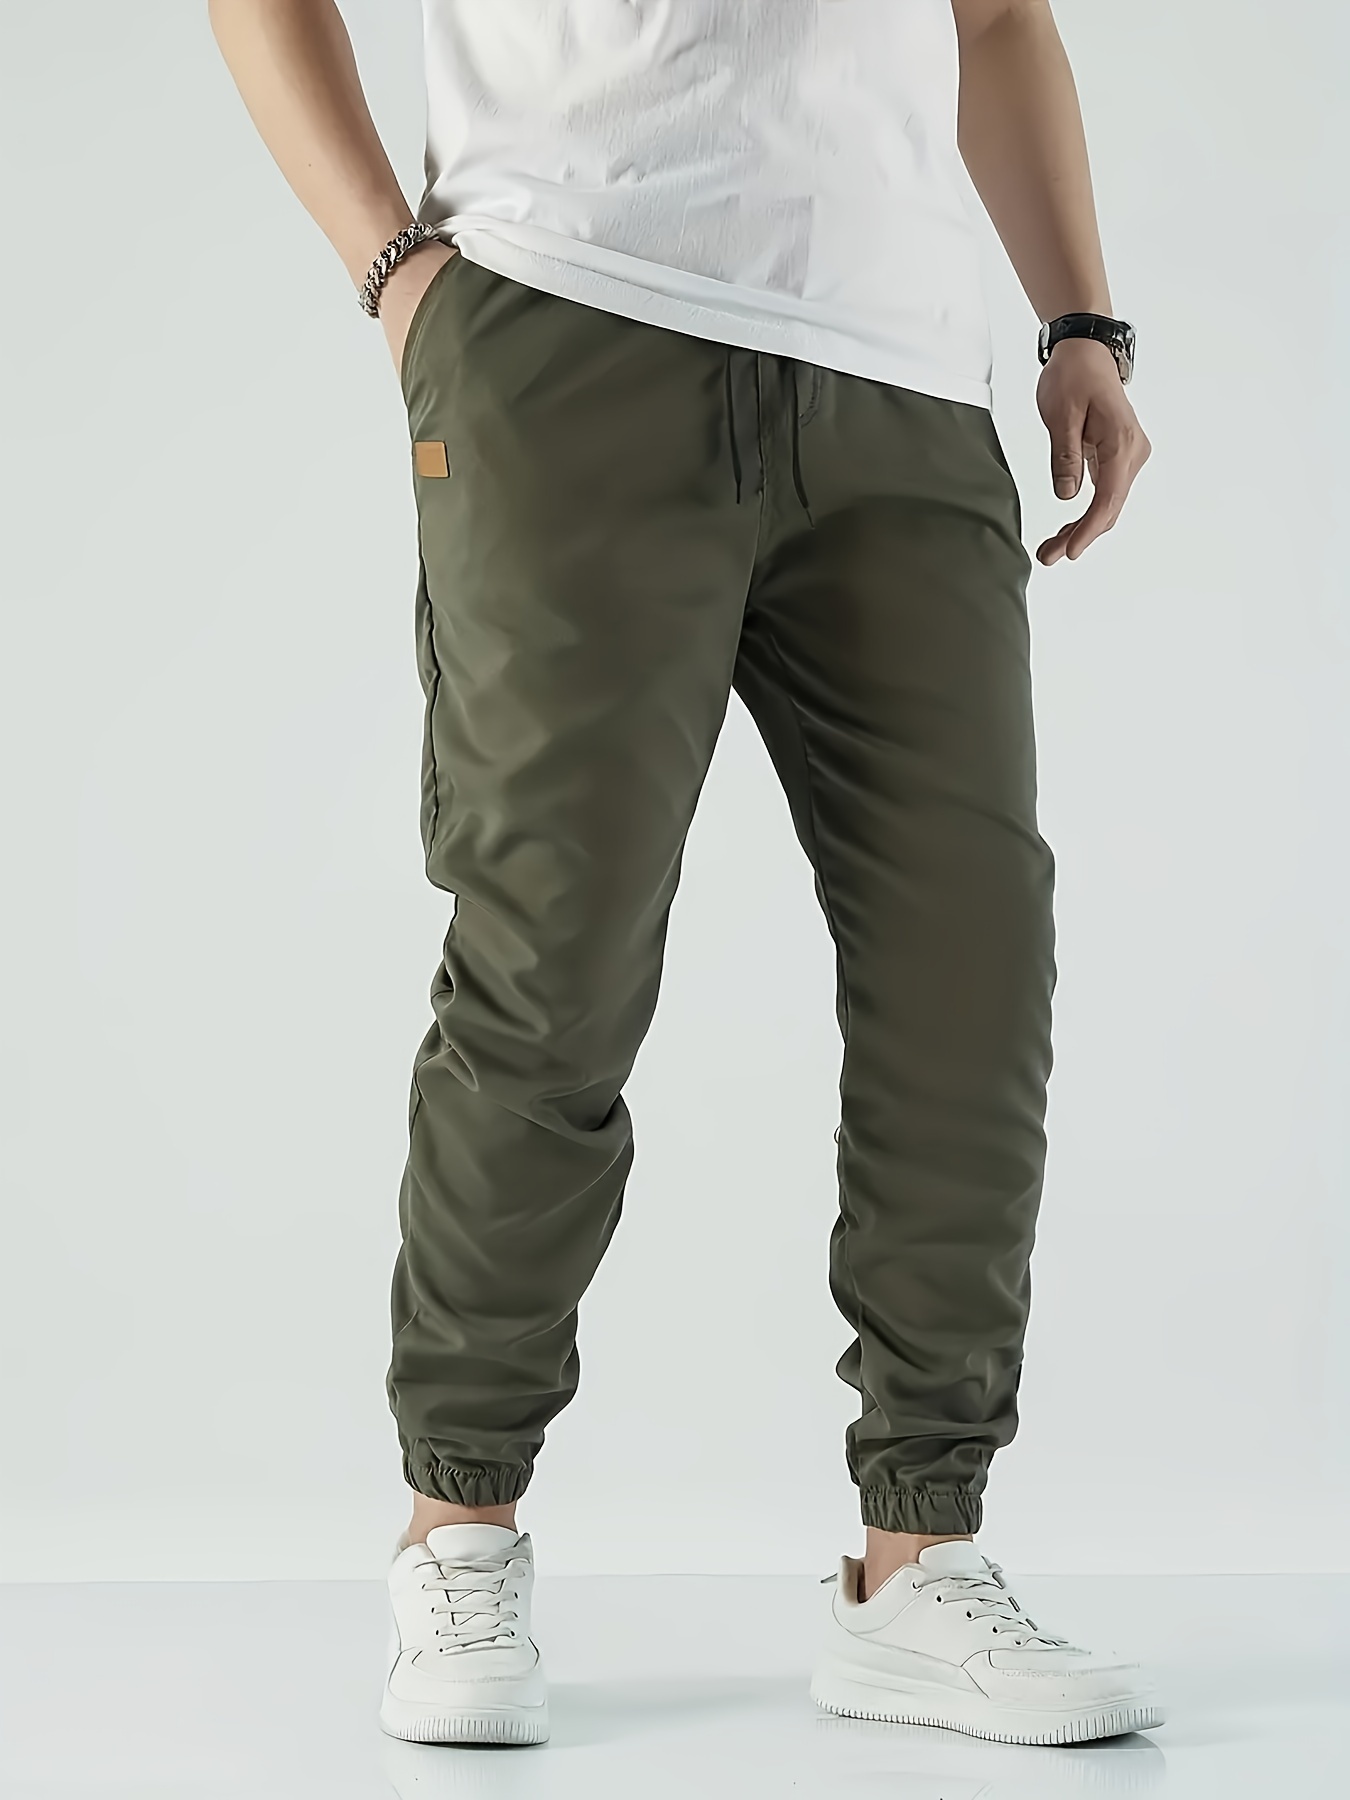 Plus Size Men's Solid Joggers Fashion Solid Pants Fall Winter, Men's  Clothing